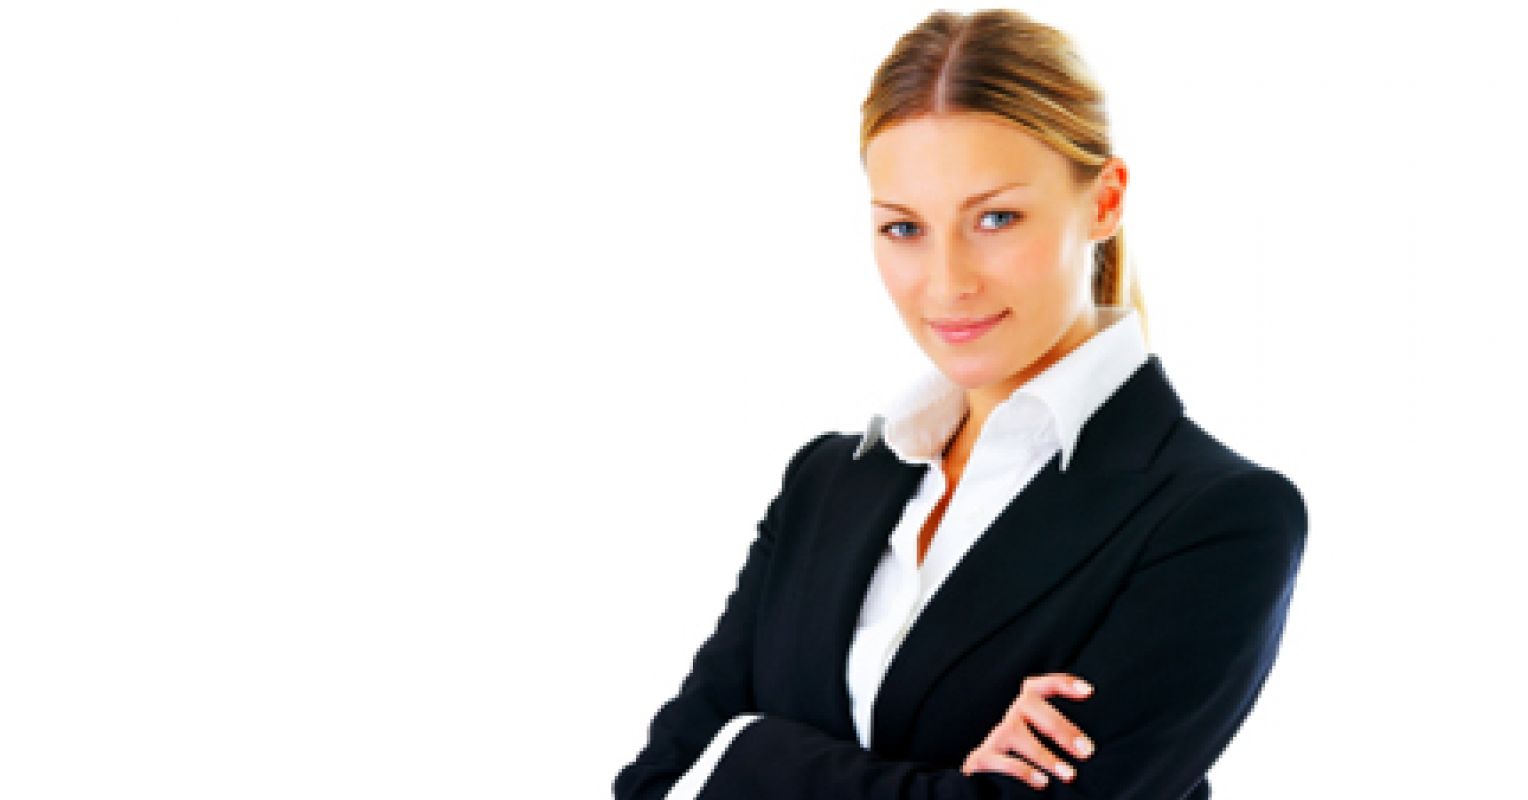 Are You a Superboss? If Not, Become One. | Psychology Today